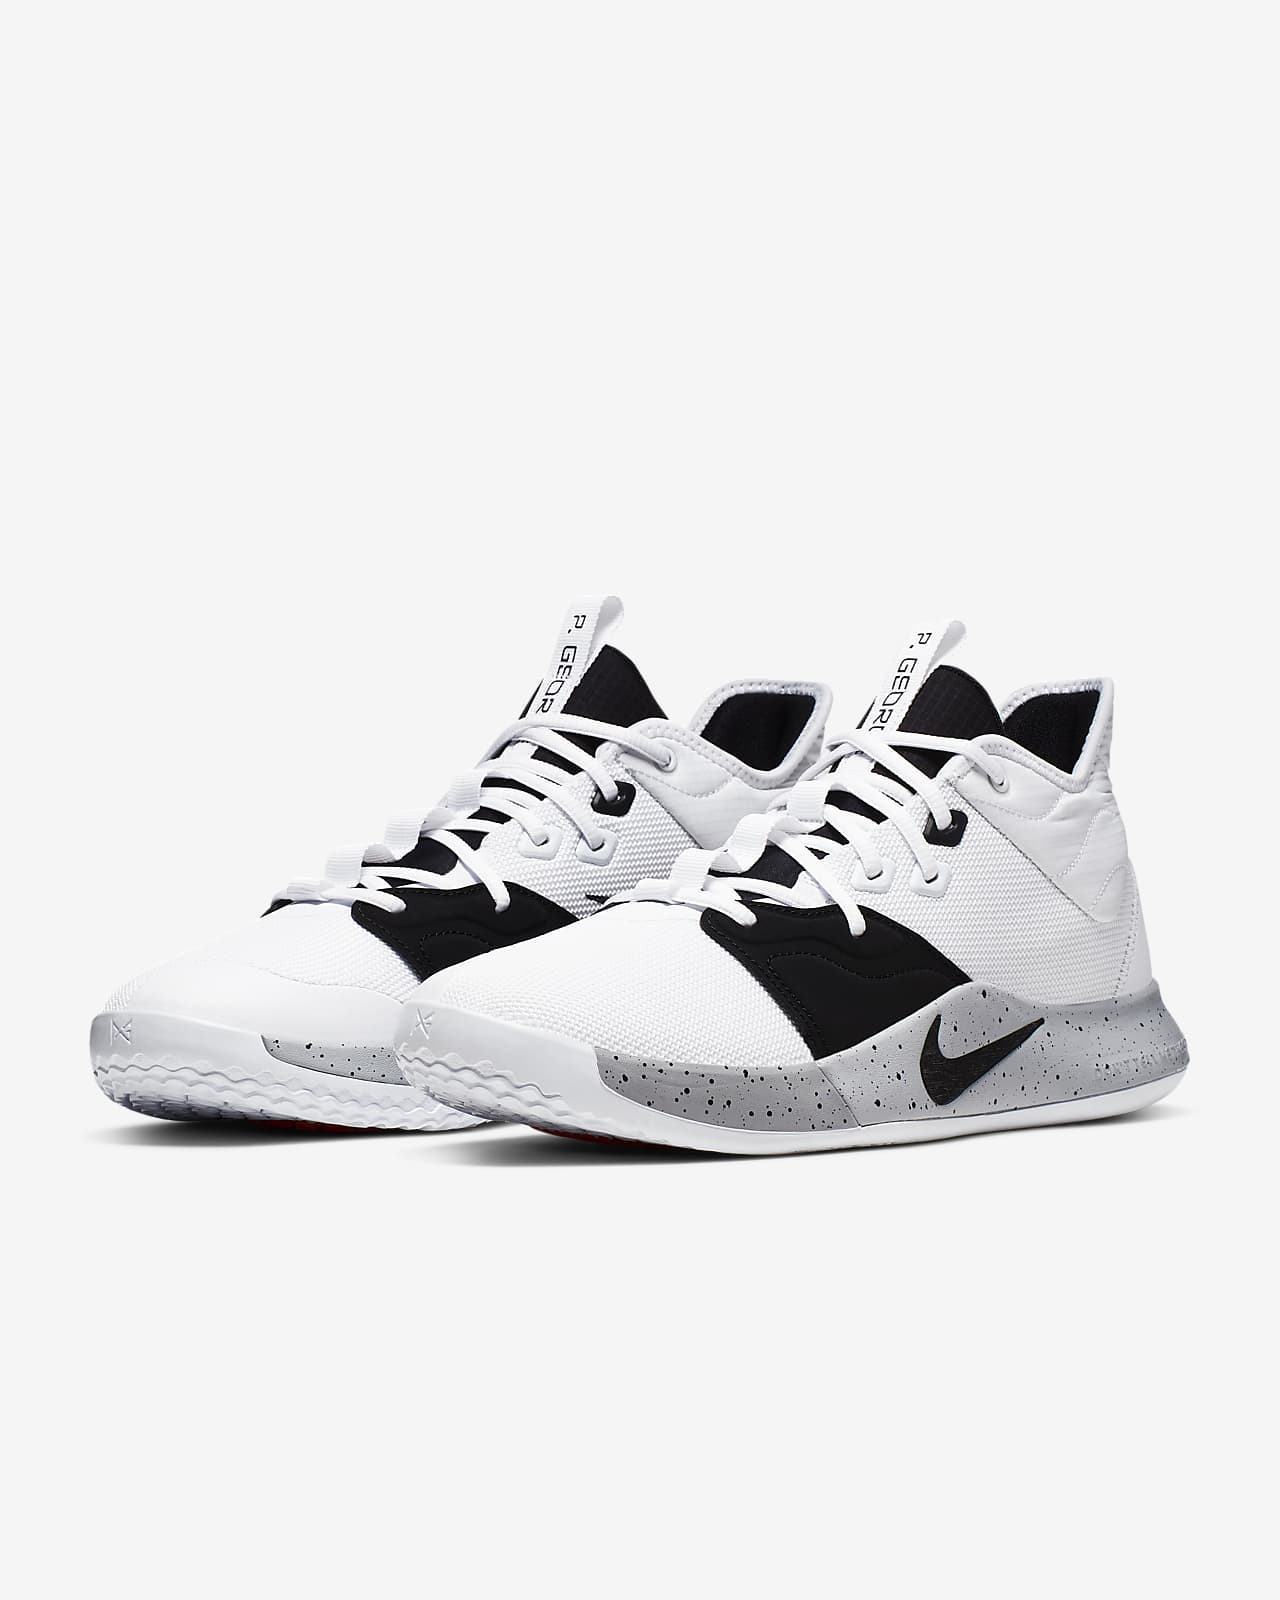 pg 3 youth basketball shoes